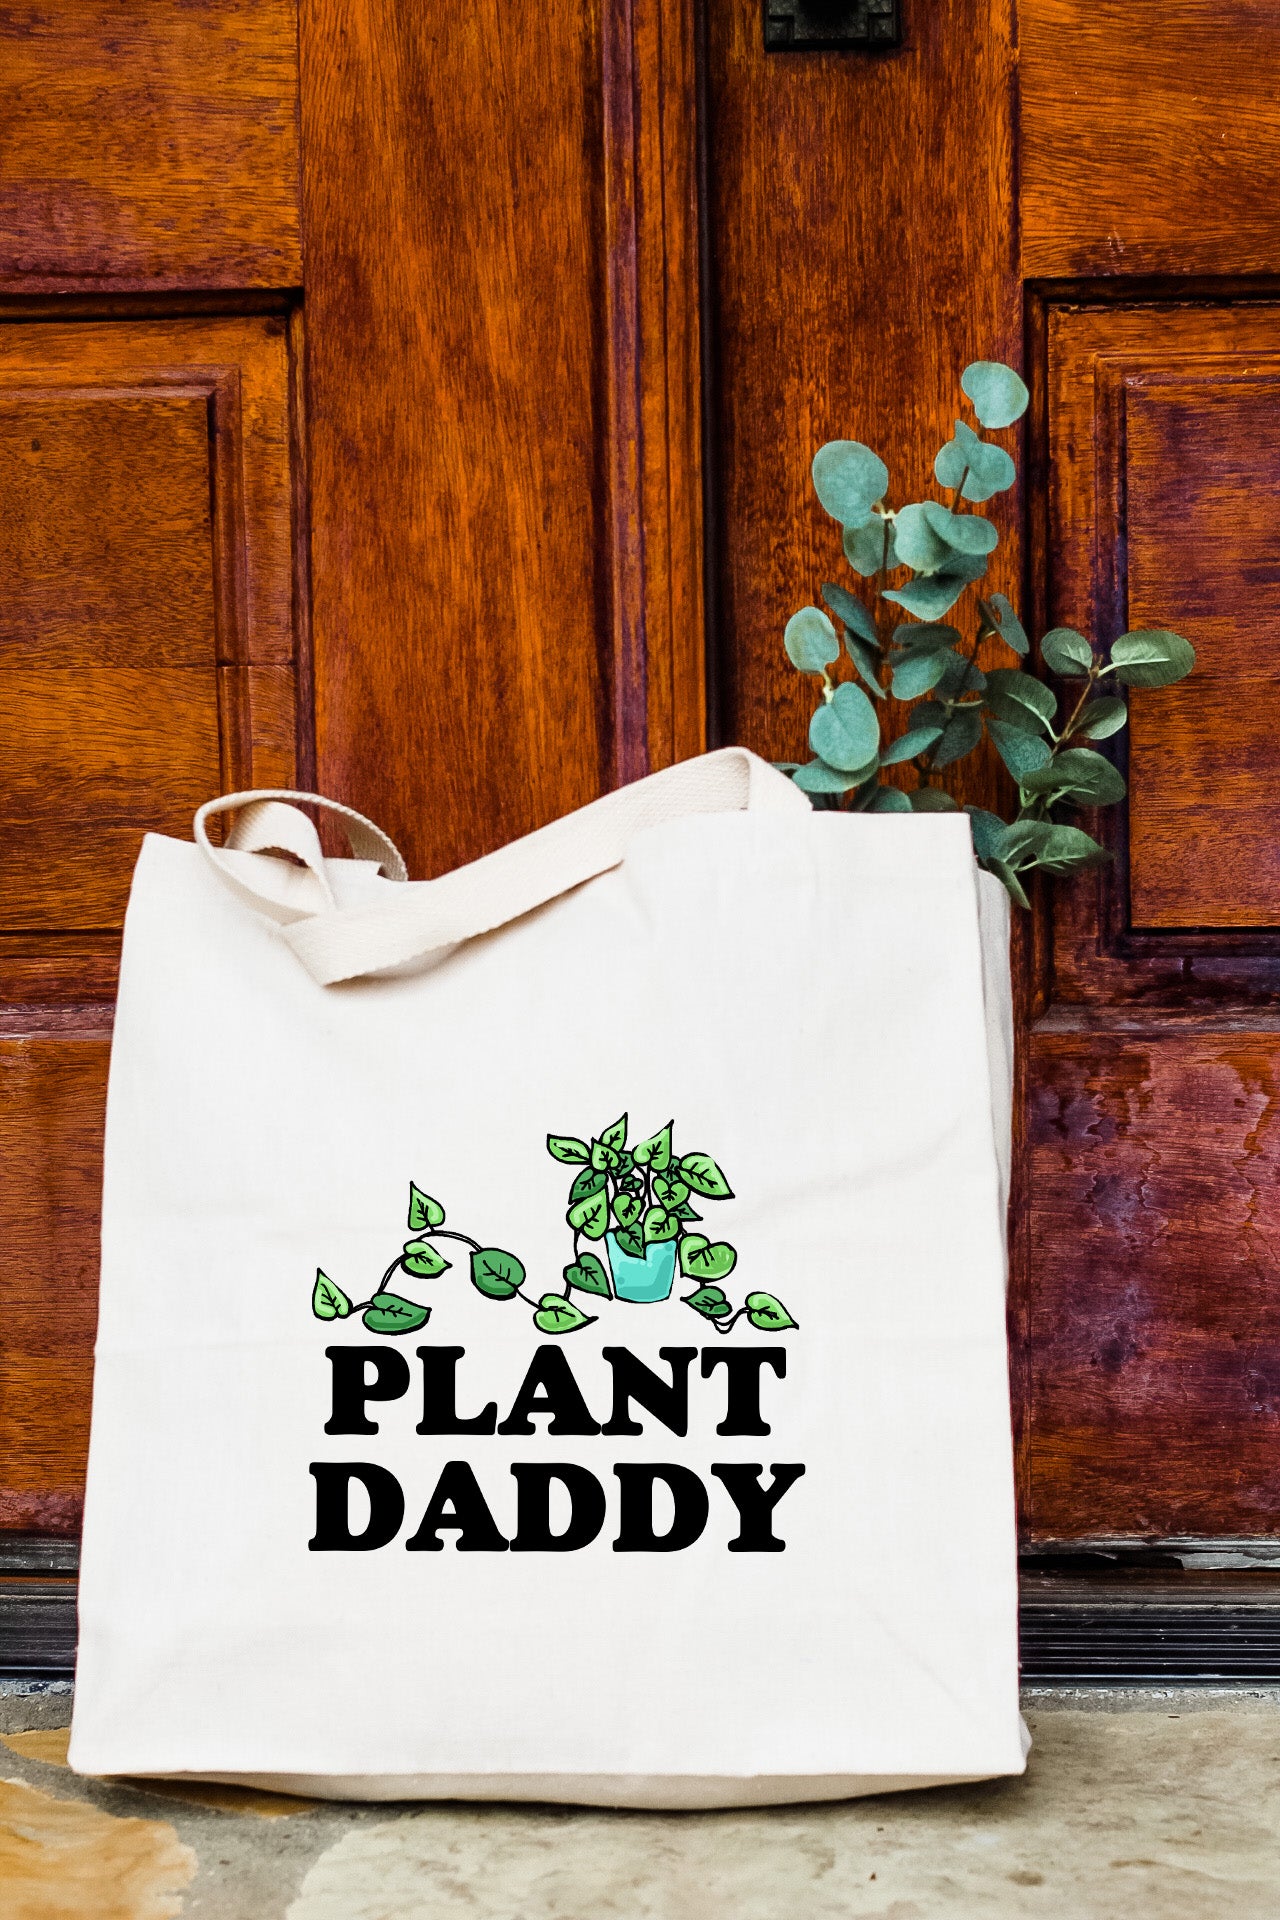 a white bag with plant daddy printed on it